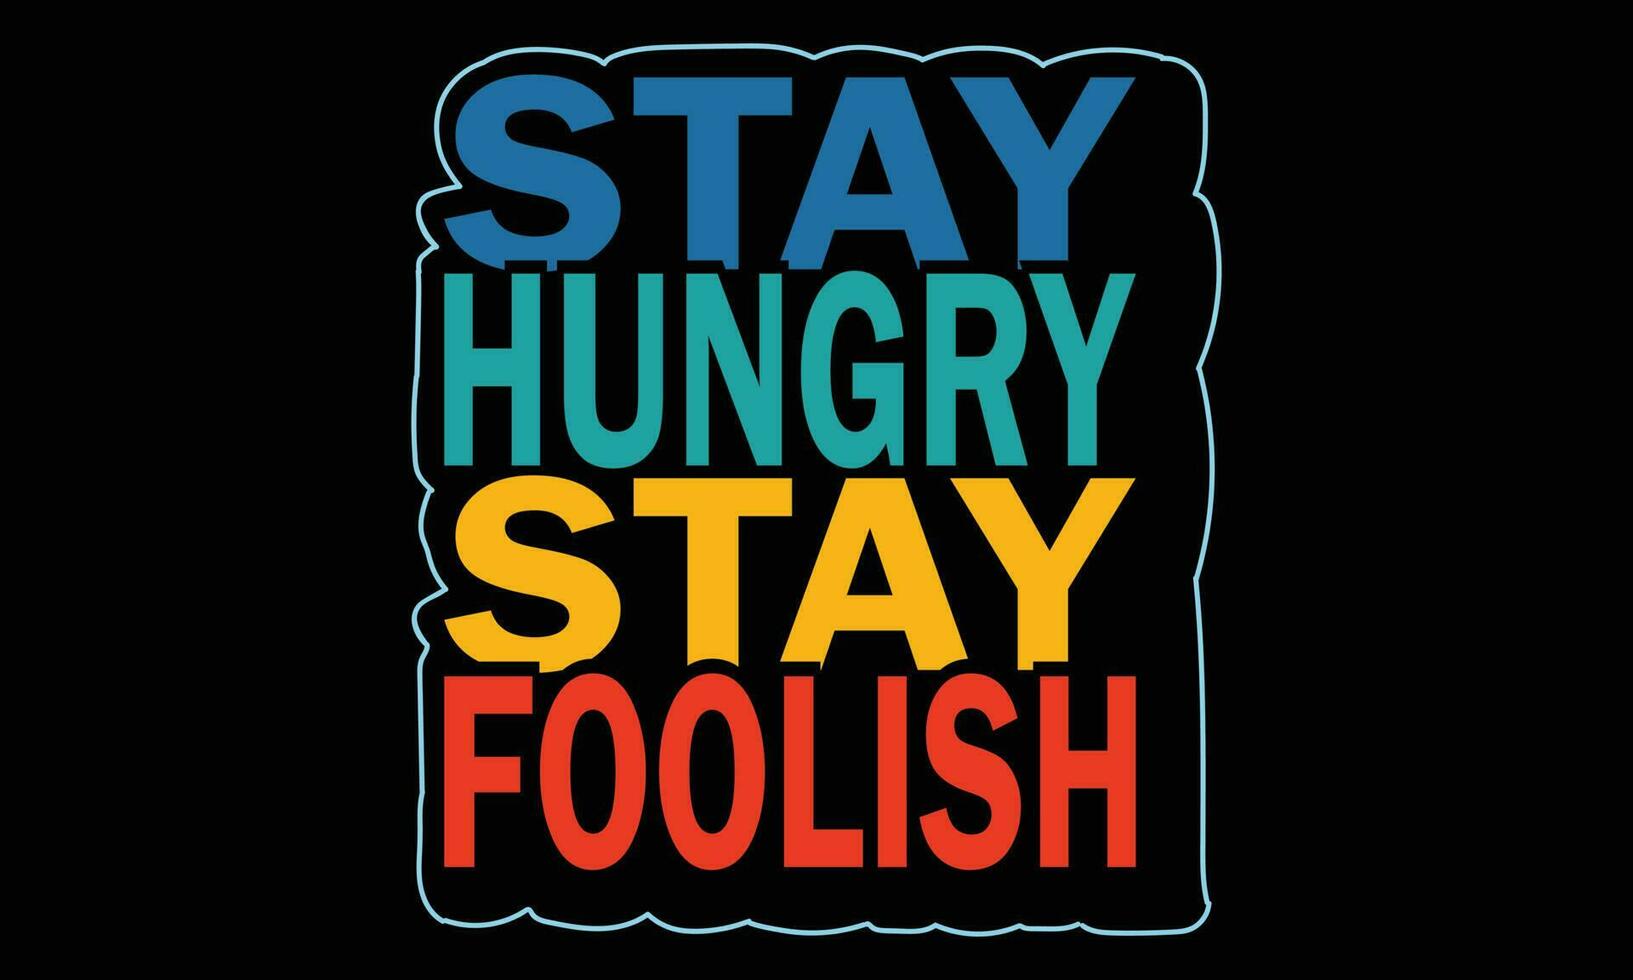 Stay hungry, stay foolish T-shirt Design Vector Illustration, quotes, motivational poster, typography t shirt design